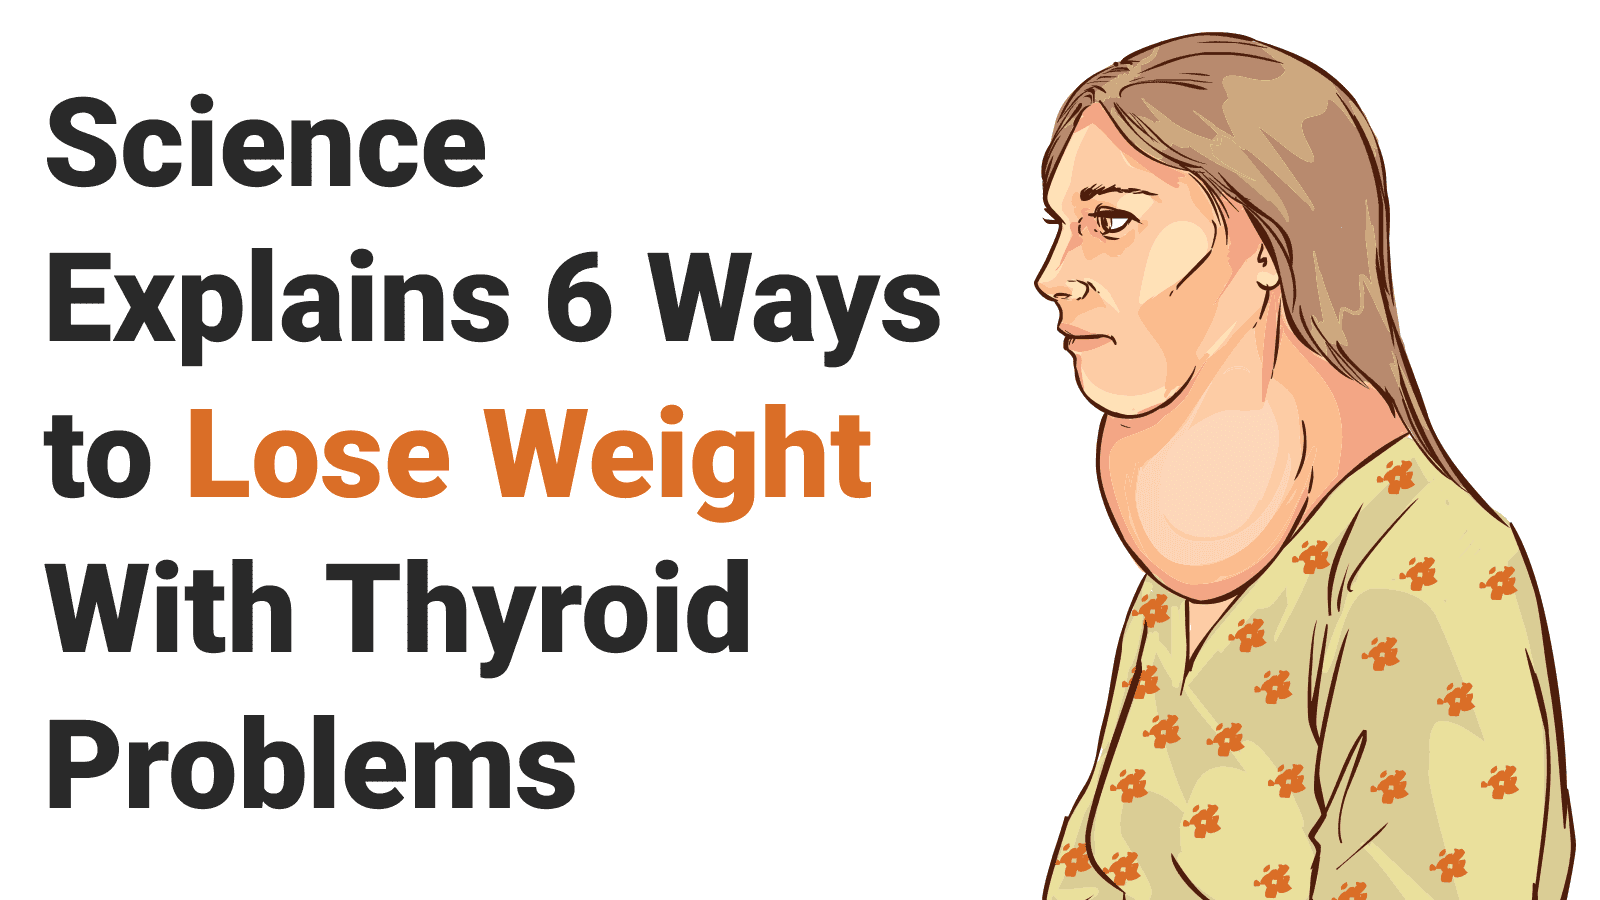 Science Explains 6 Ways to Lose Weight With Thyroid Problems